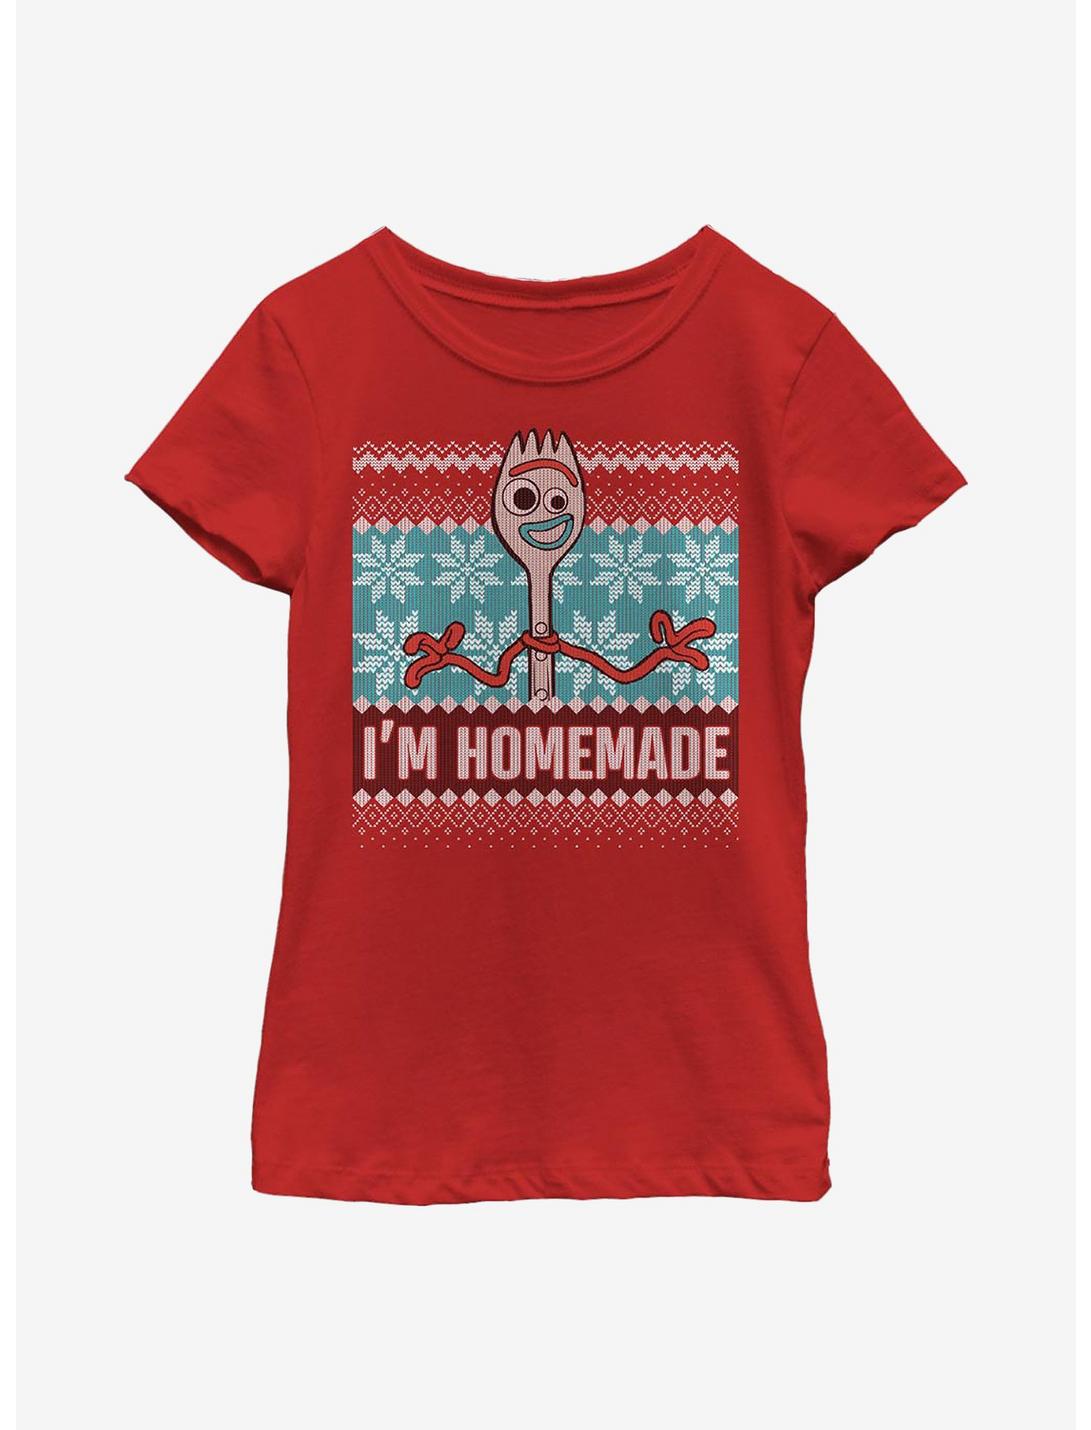 Disney Pixar Toy Story 4 Forky I'm Homemade Holiday Youth Girls T-Shirt, RED, hi-res